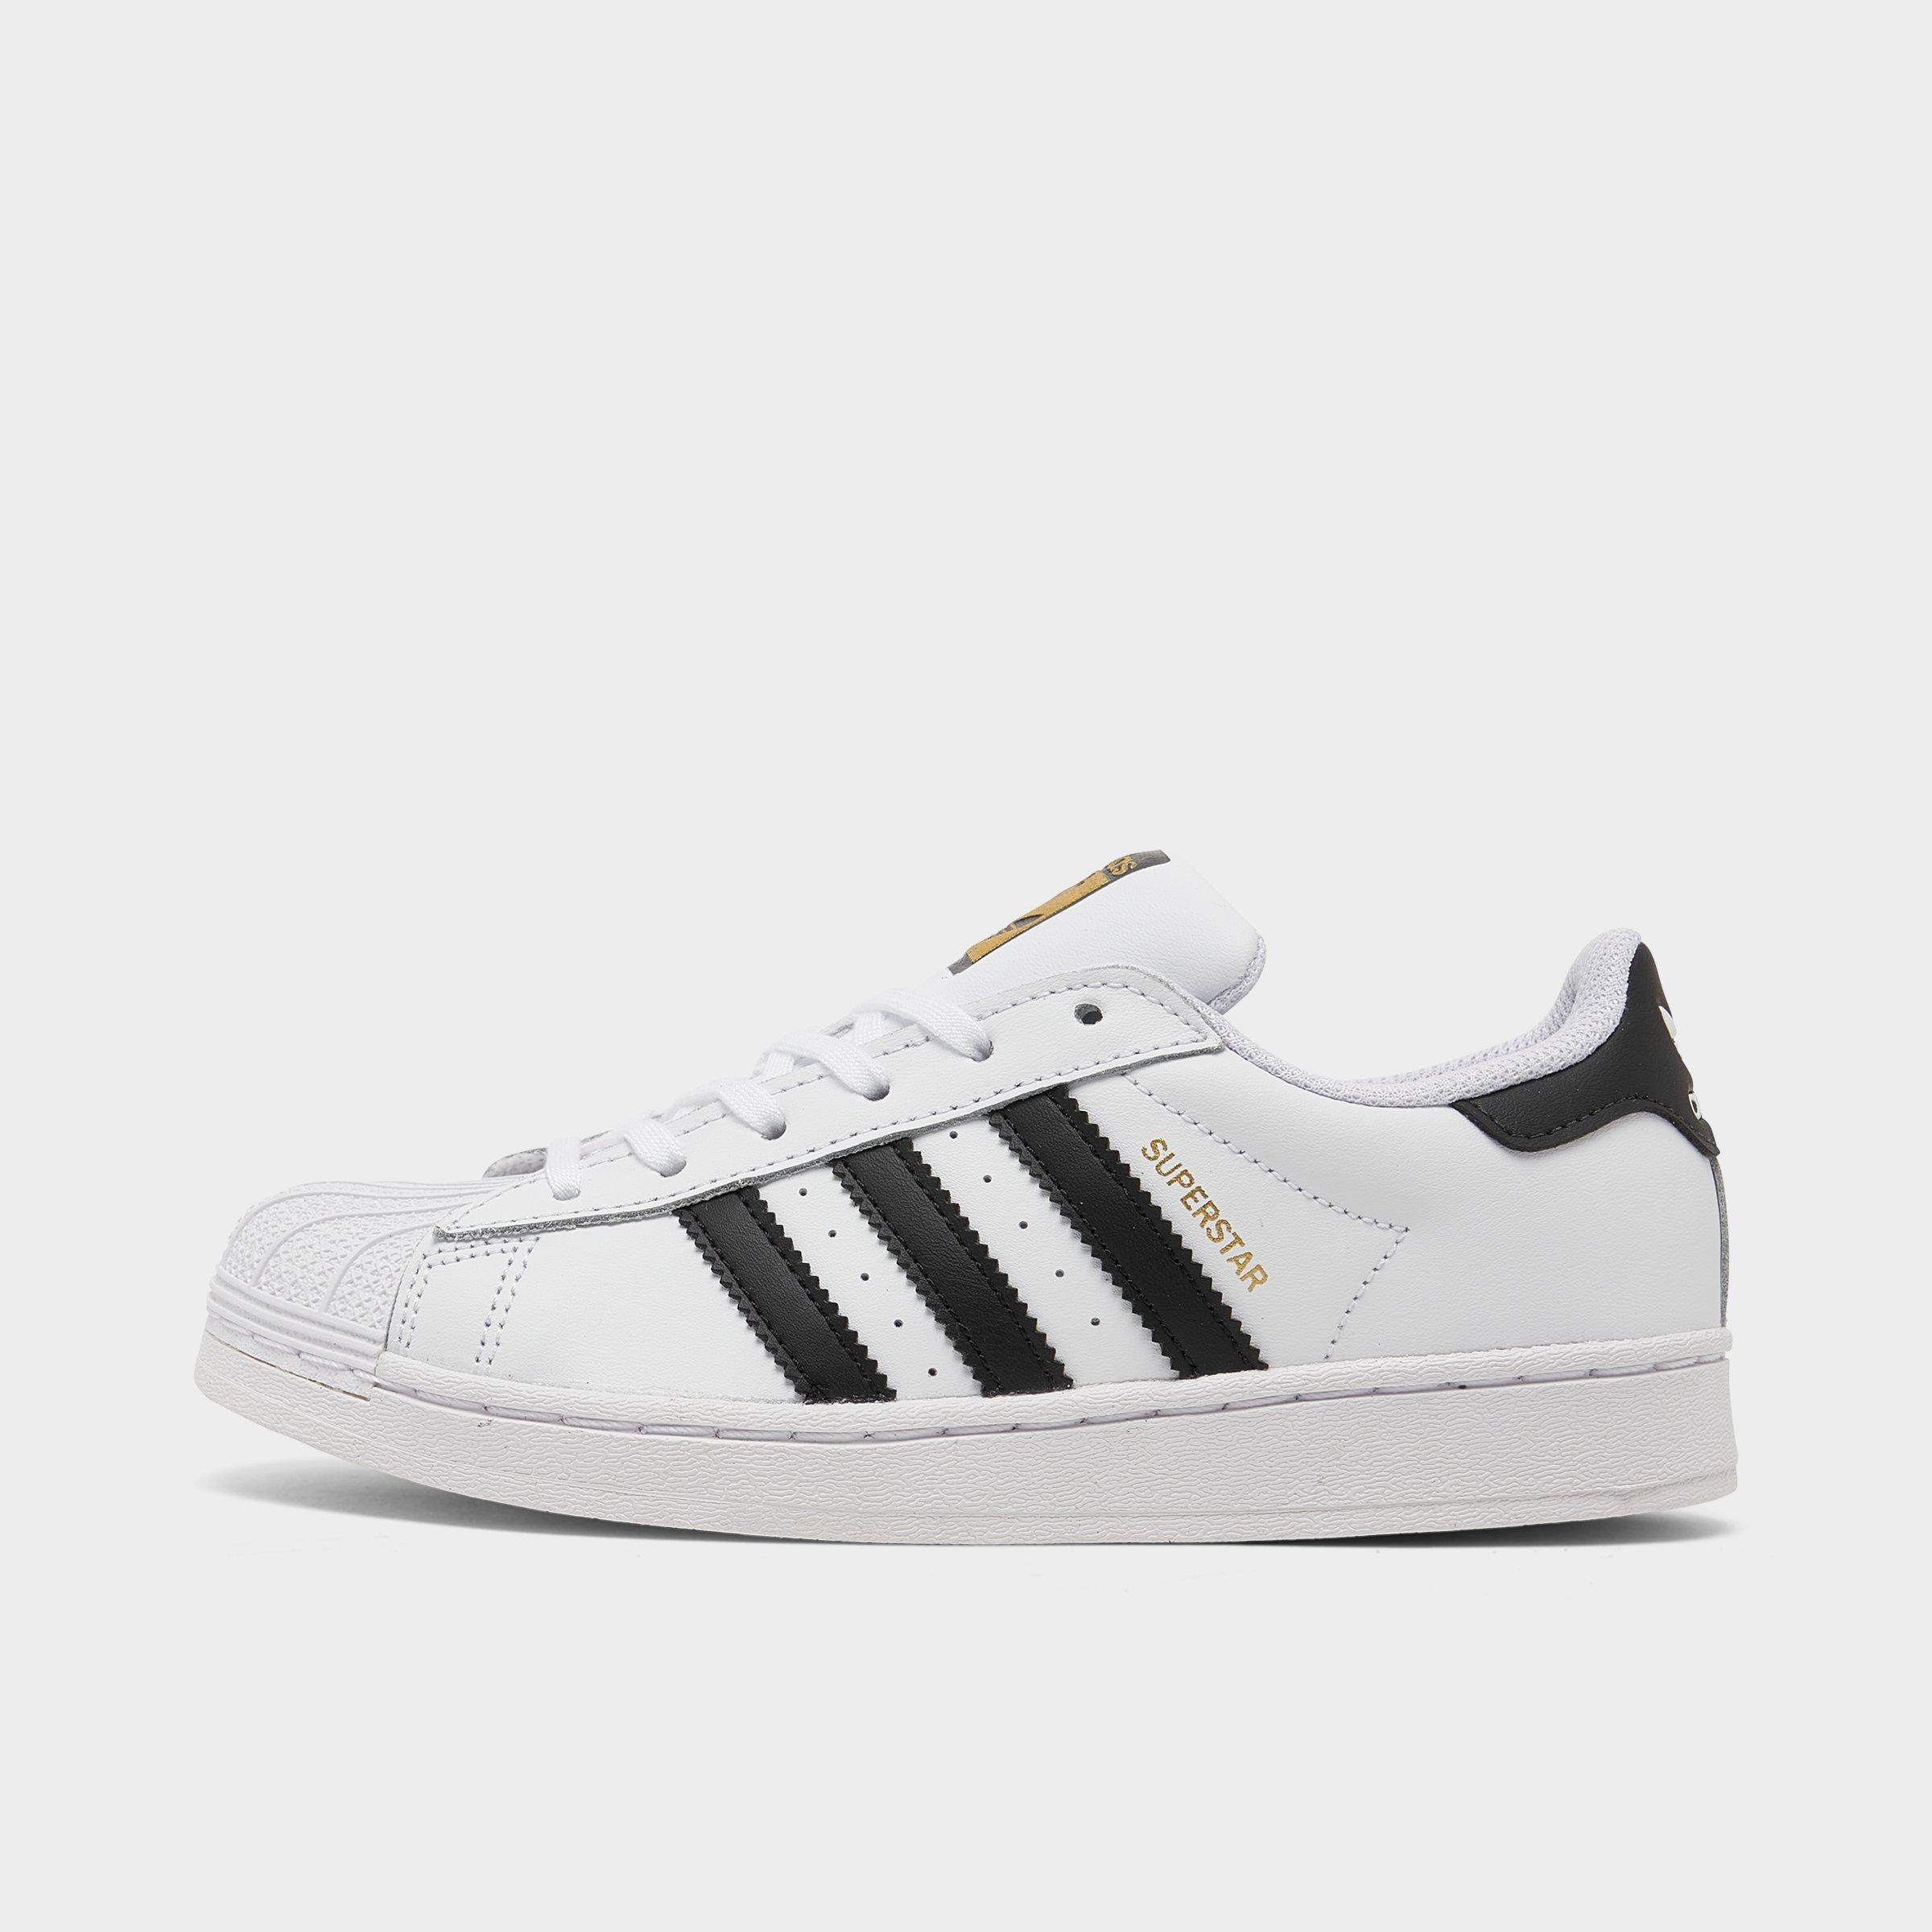 adidas youth superstar shoes